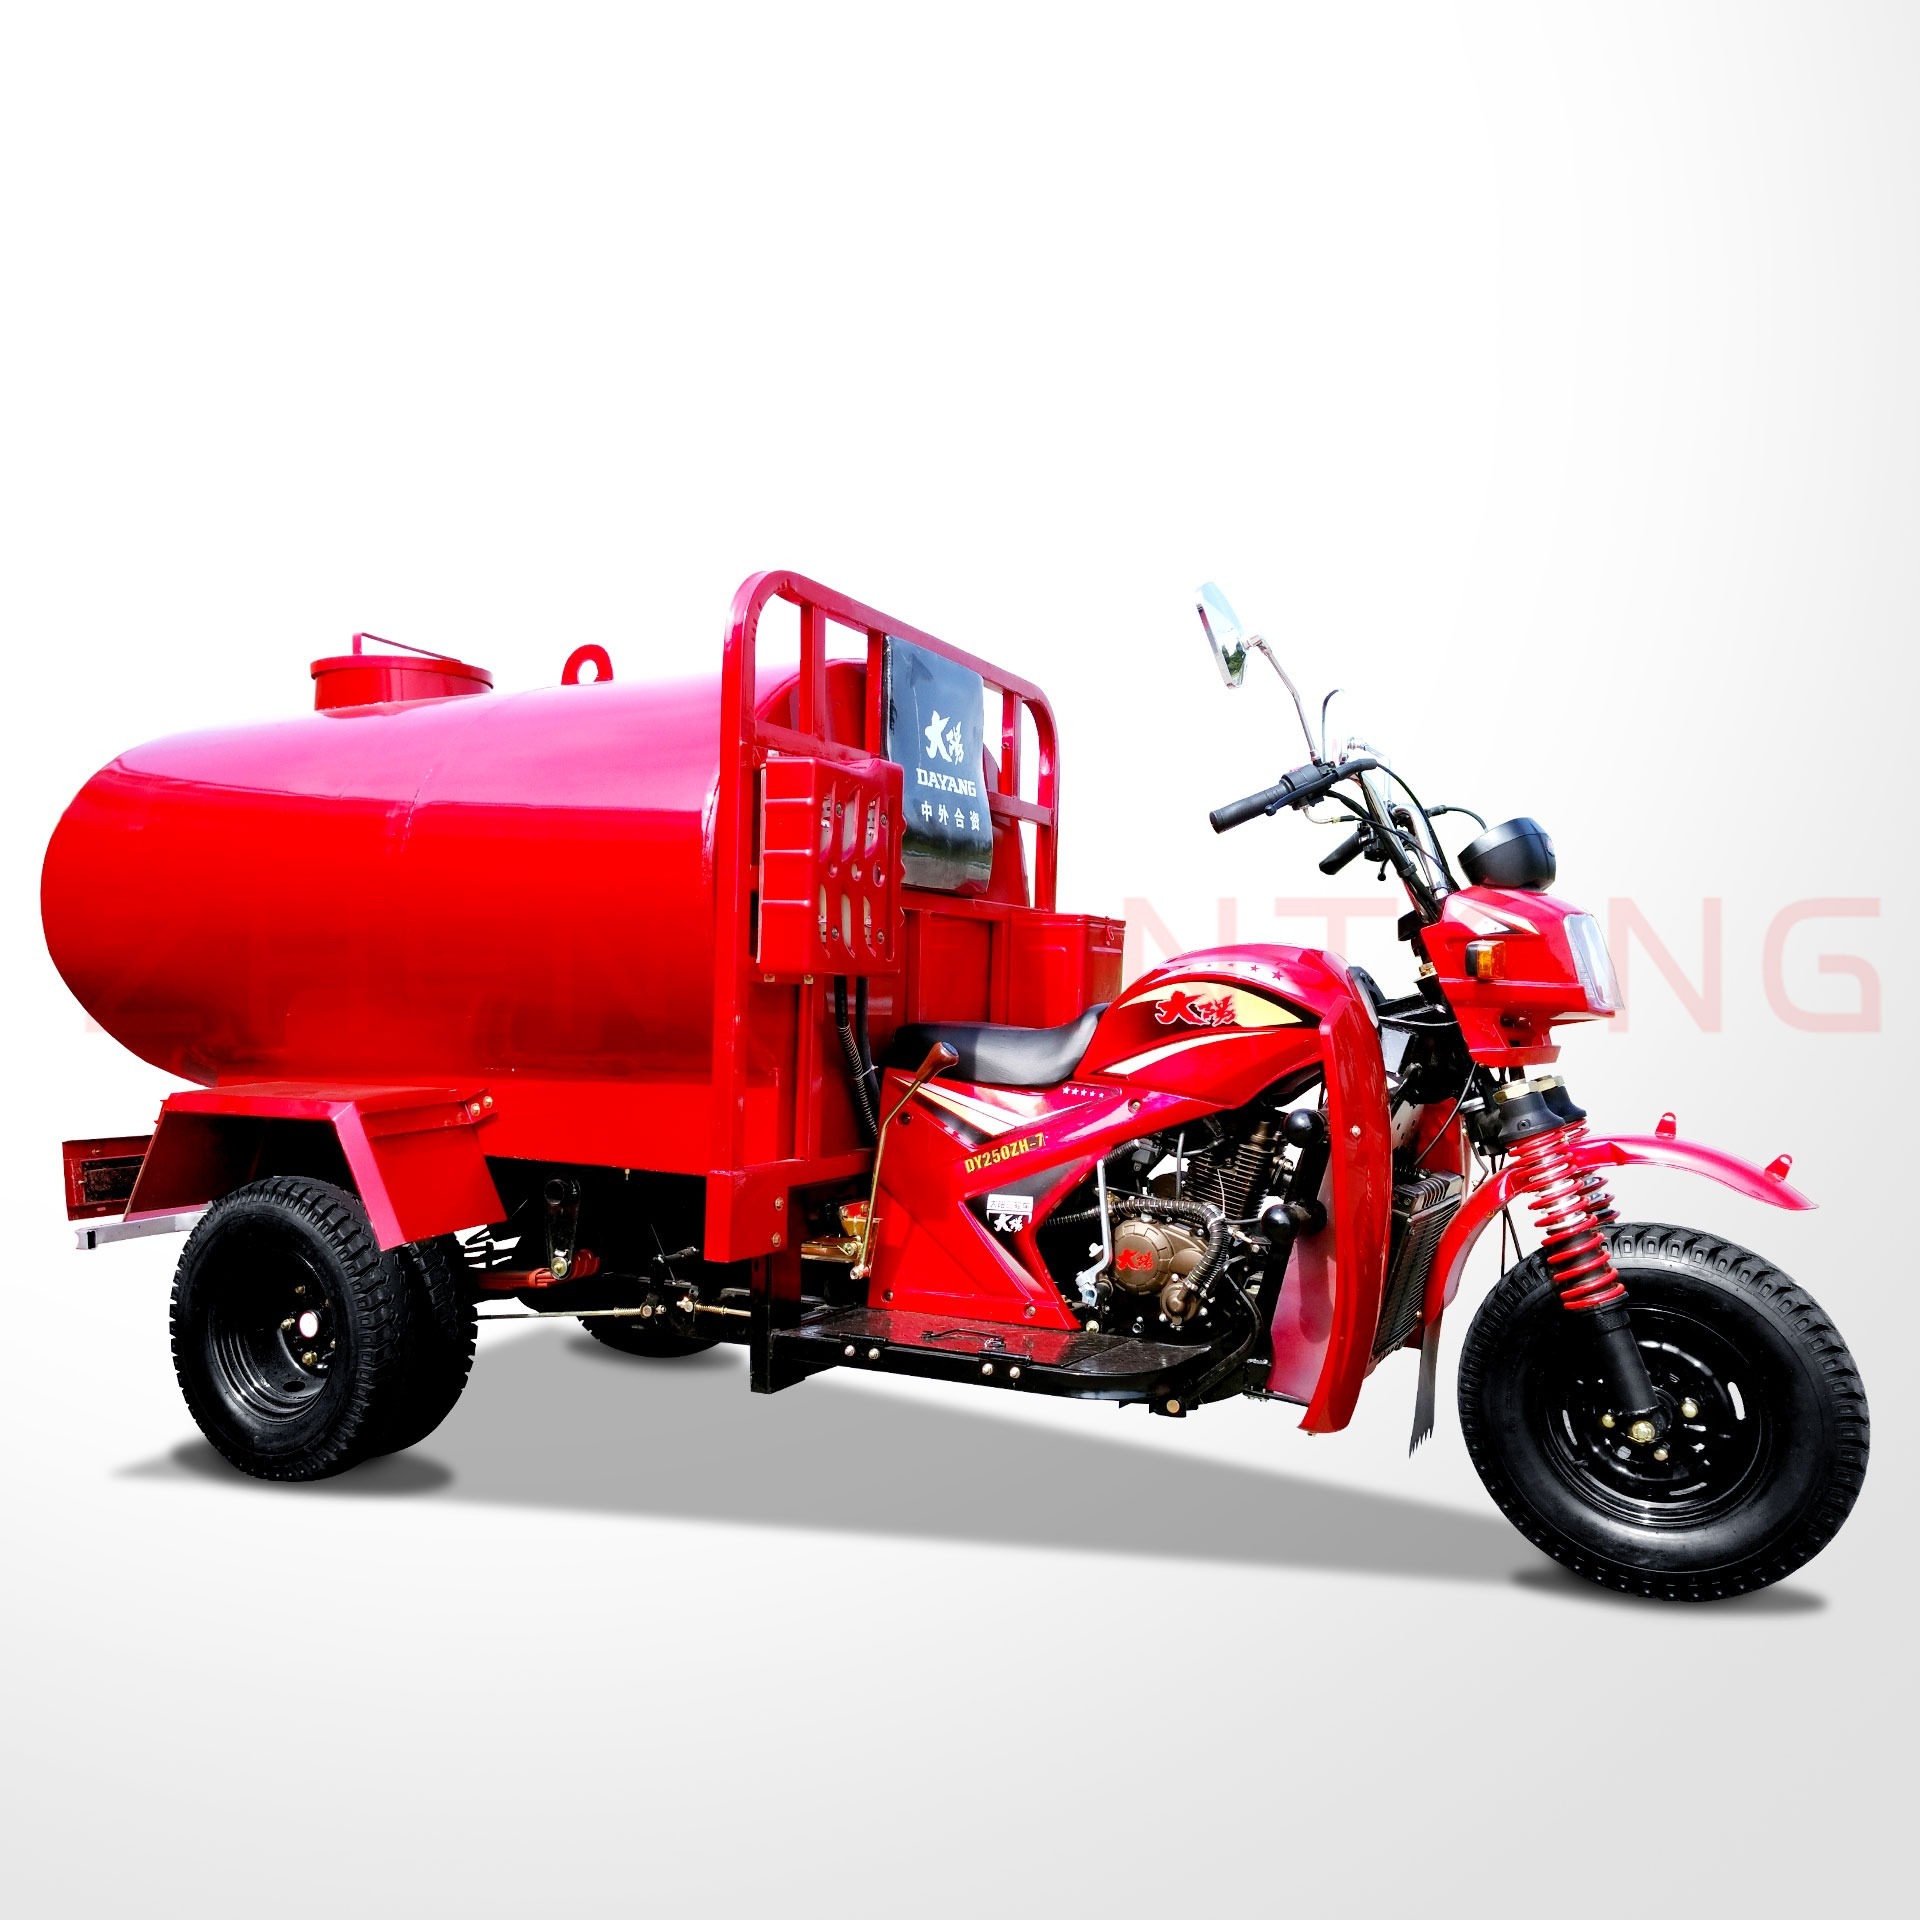 2016 Chinese new high quality 250cc/300cc water tank adult 3 wheel motorcycle